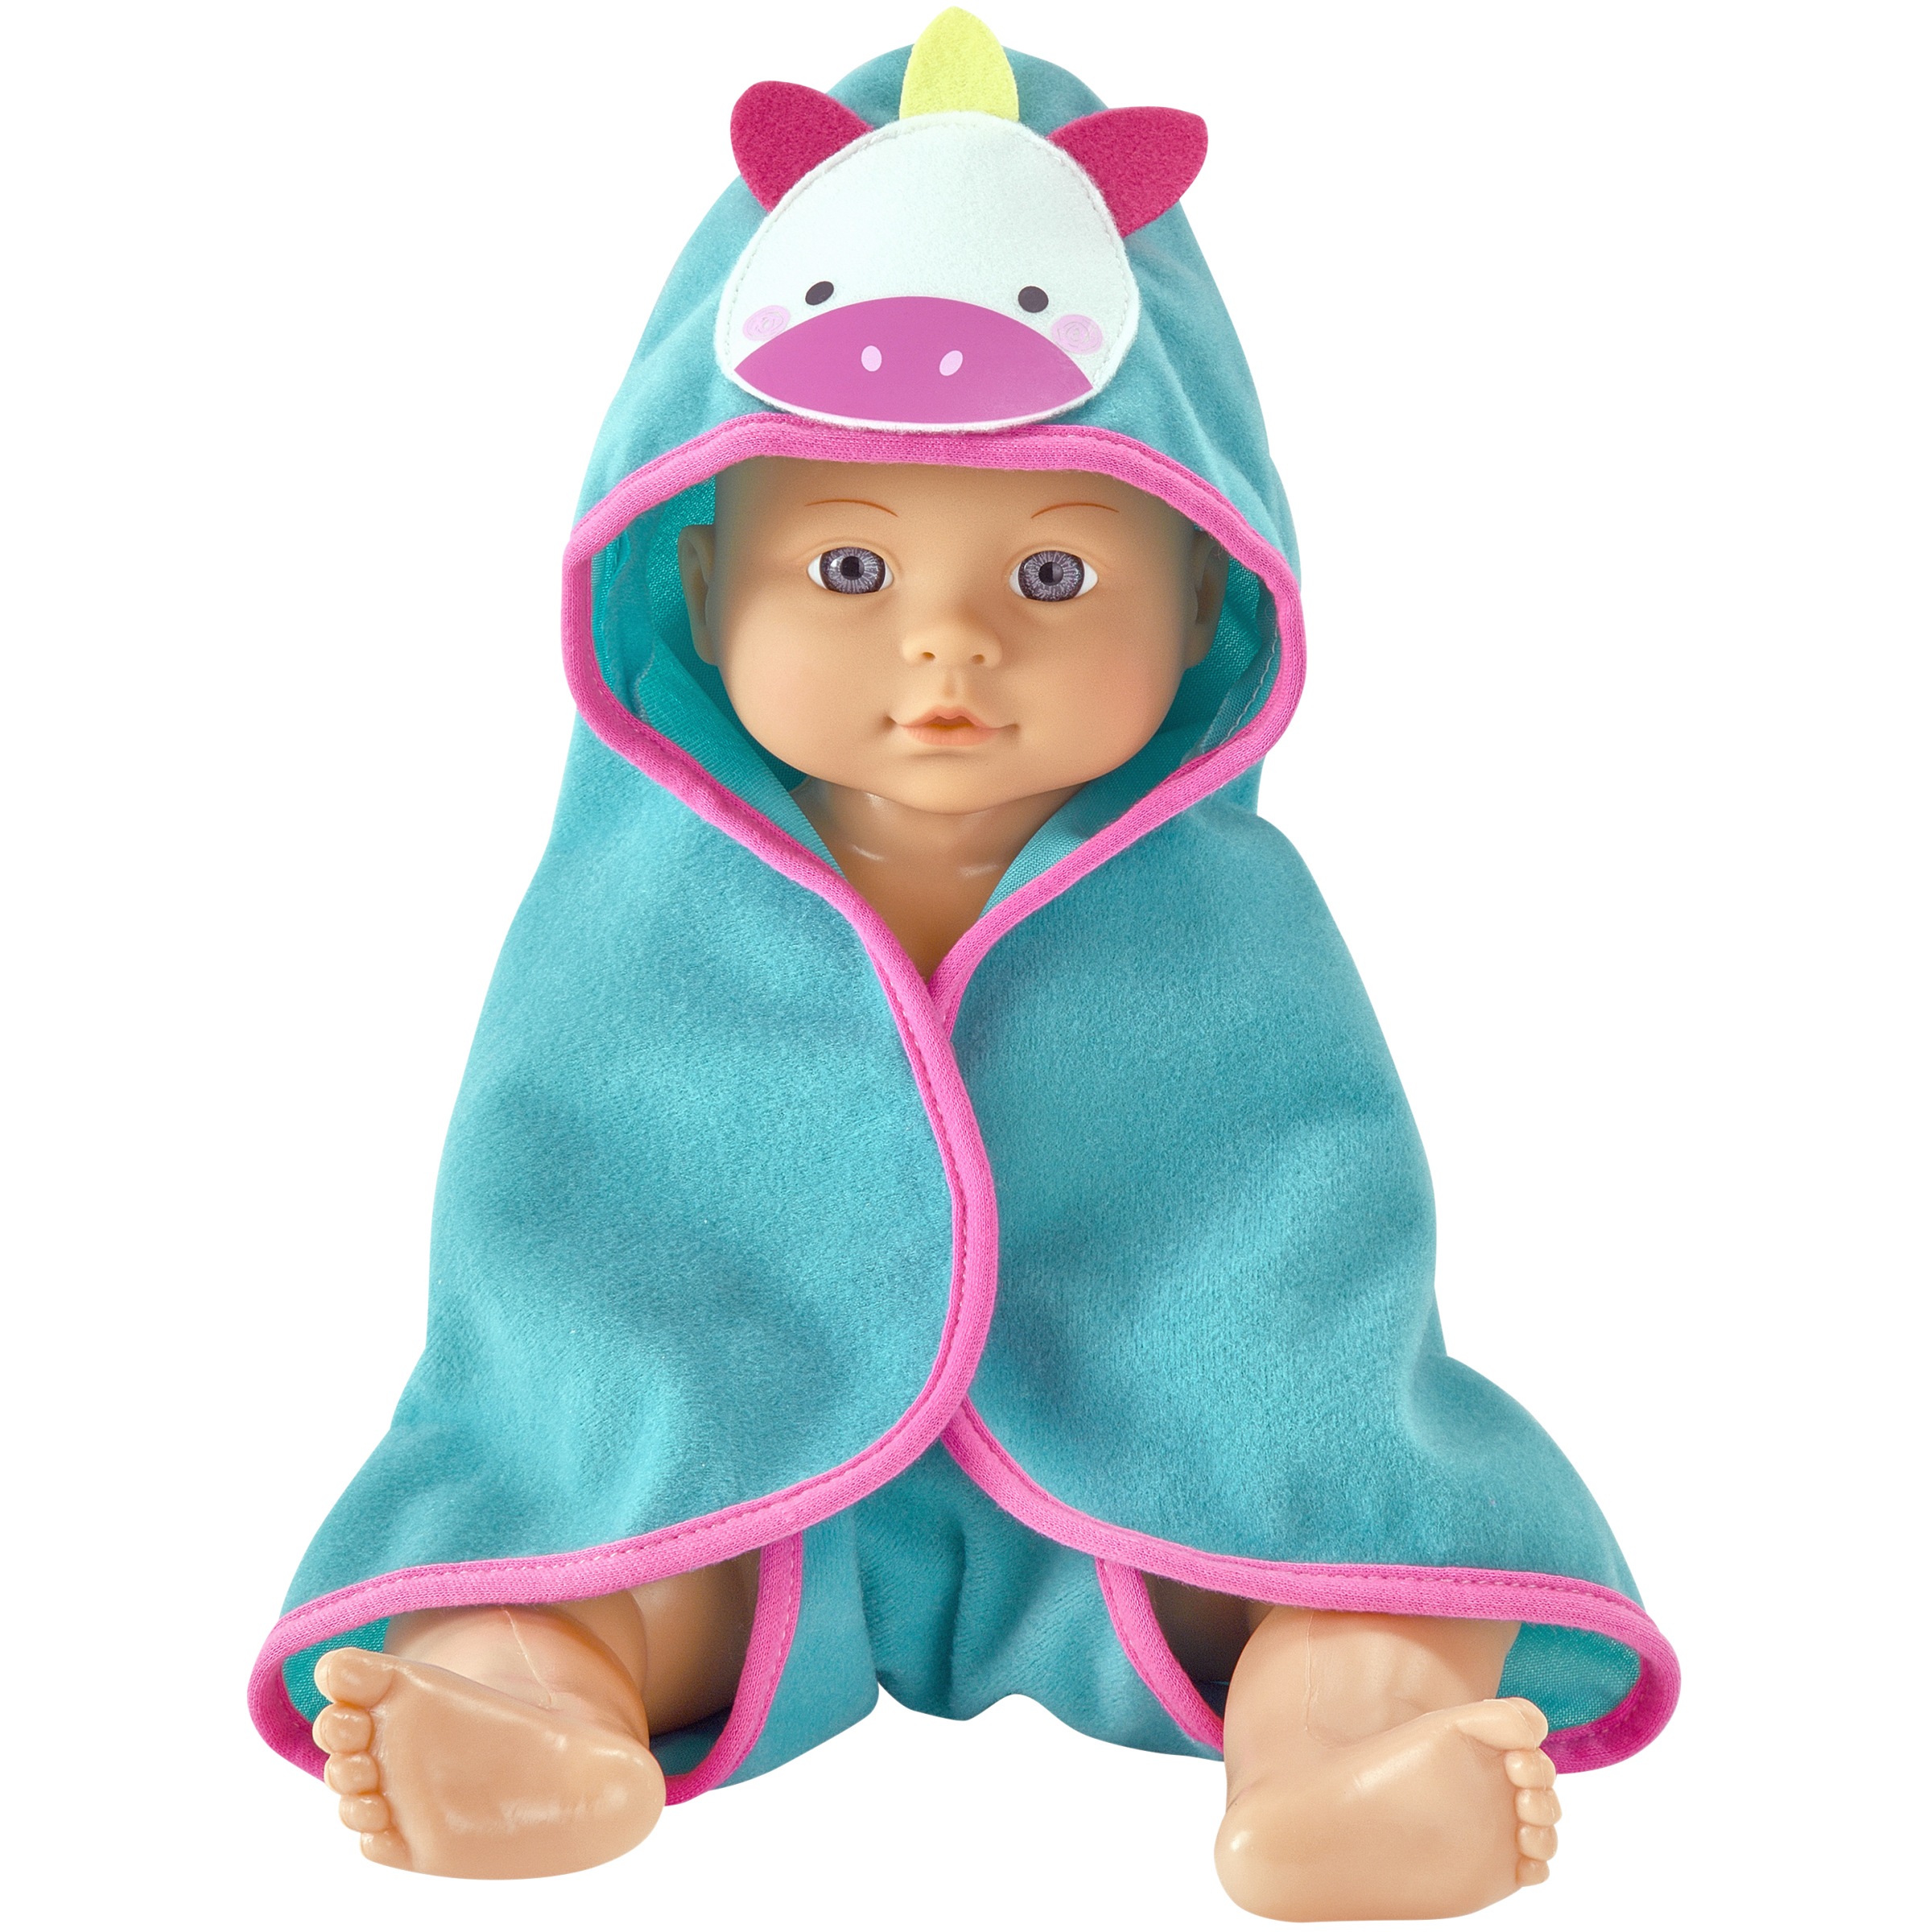 My Sweet Love 12.5" Baby Doll and Outfits Play Set, 6 Pieces, Unicorn - image 4 of 5